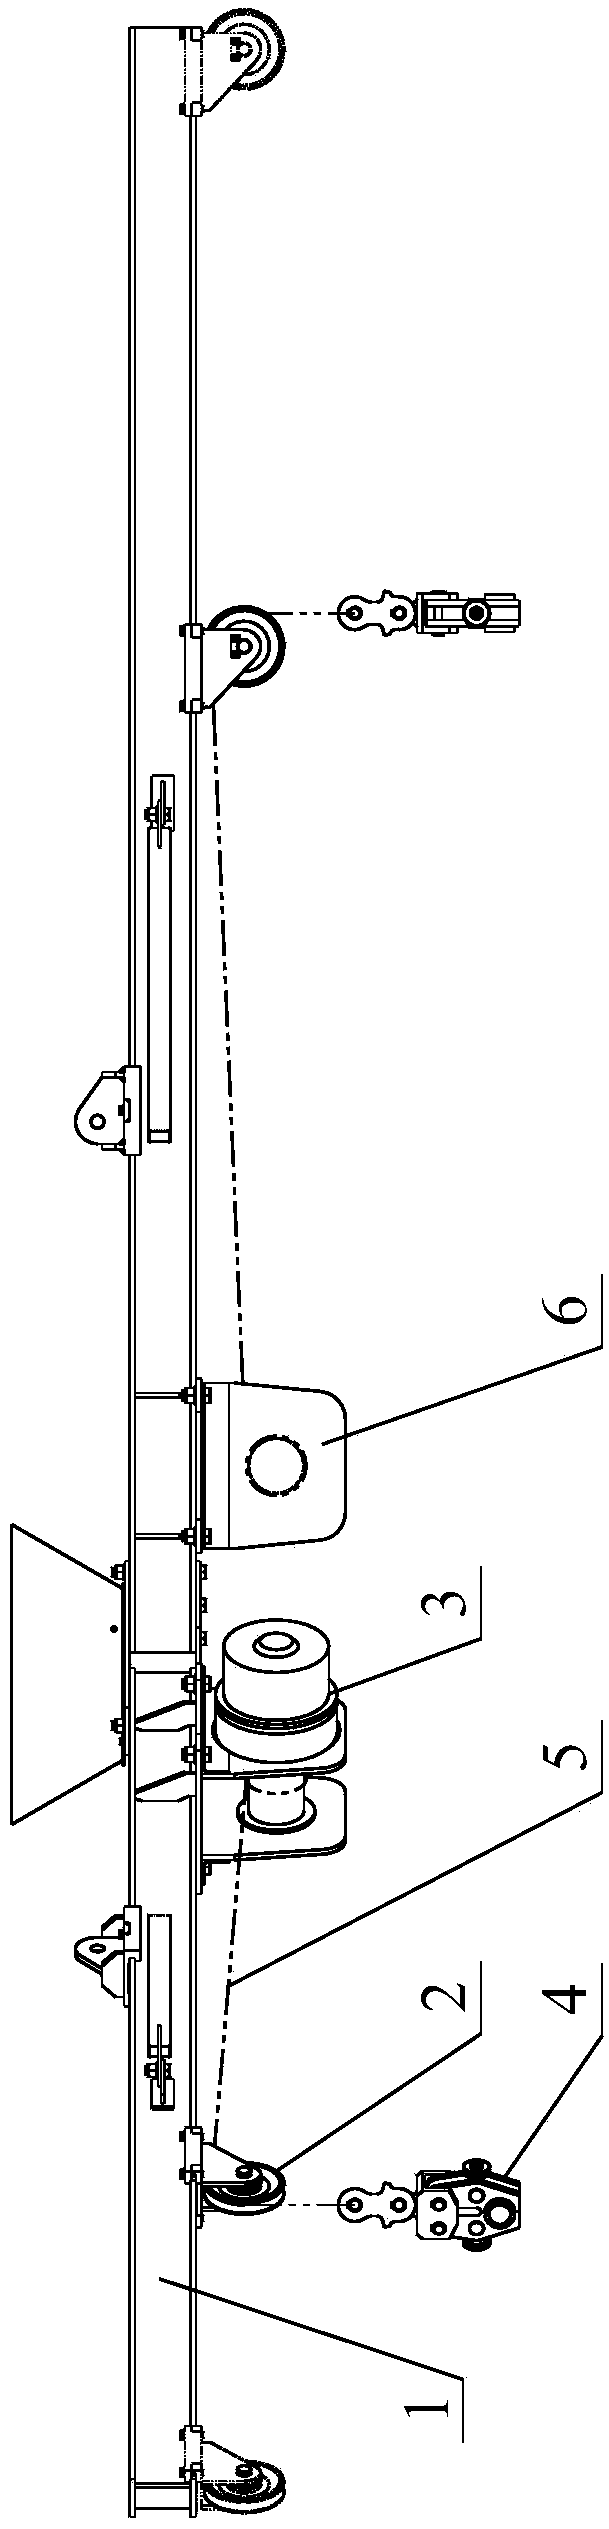 Special lifting device and lifting method for lifting reflector unit of radiotelescope